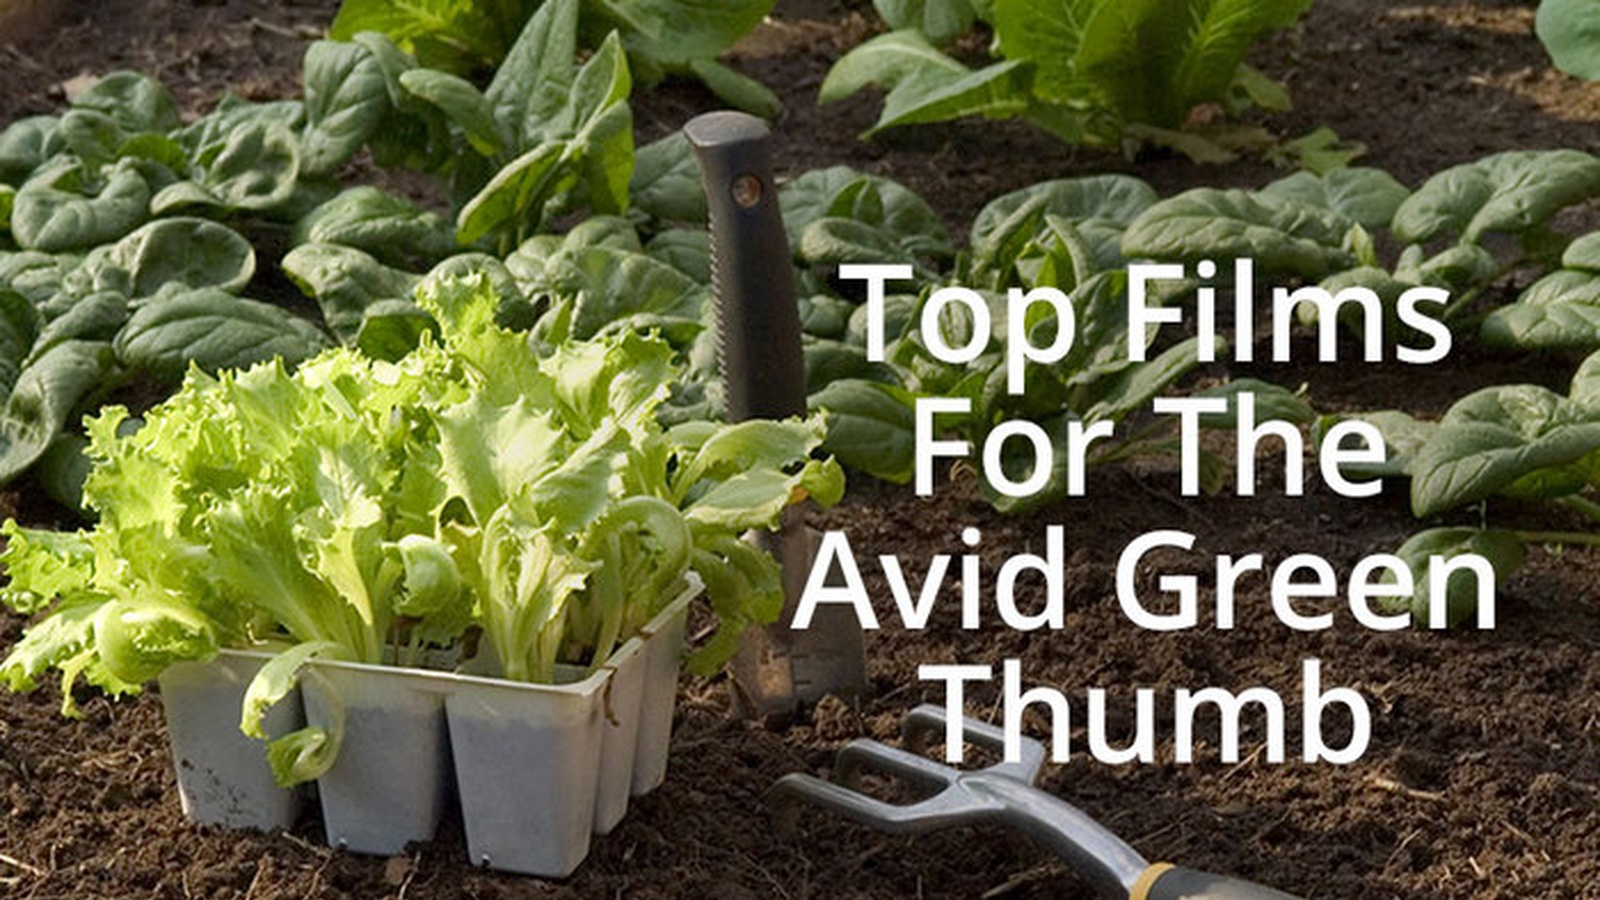 Top Films For The Avid Green Thumb